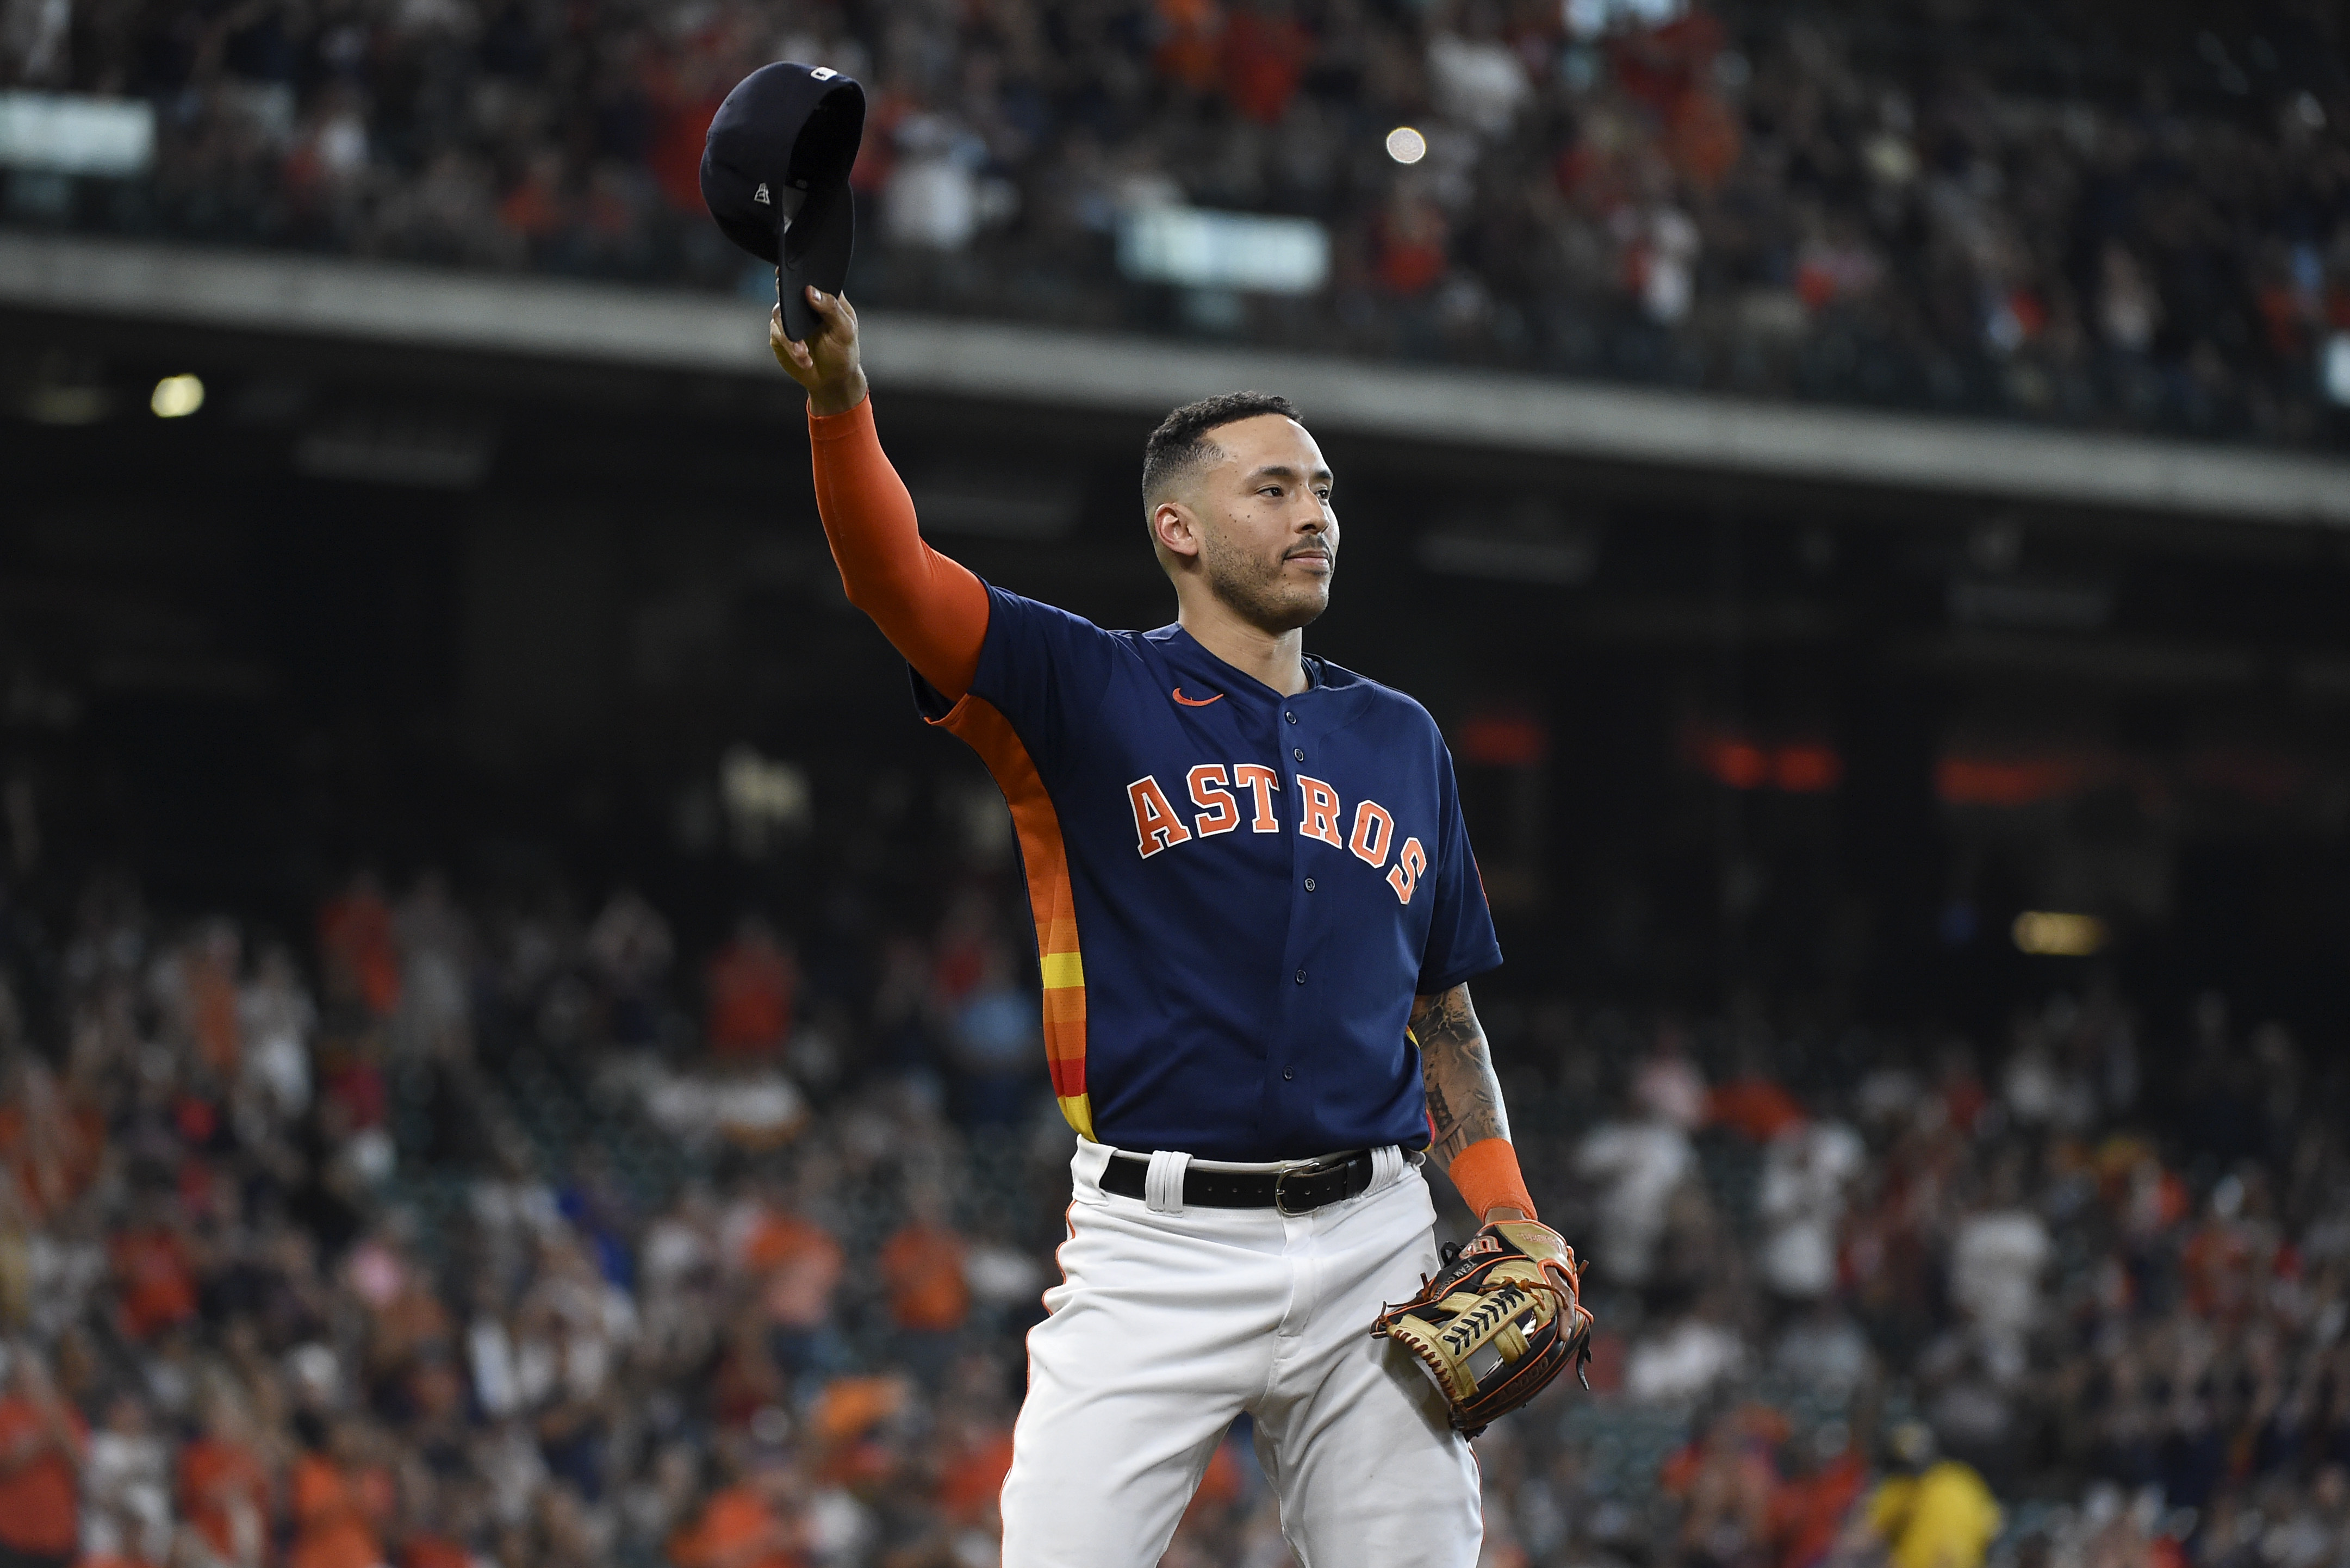 Astros shortstop Carlos Correa named 2015 American League Rookie of the  Year - Minor League Ball